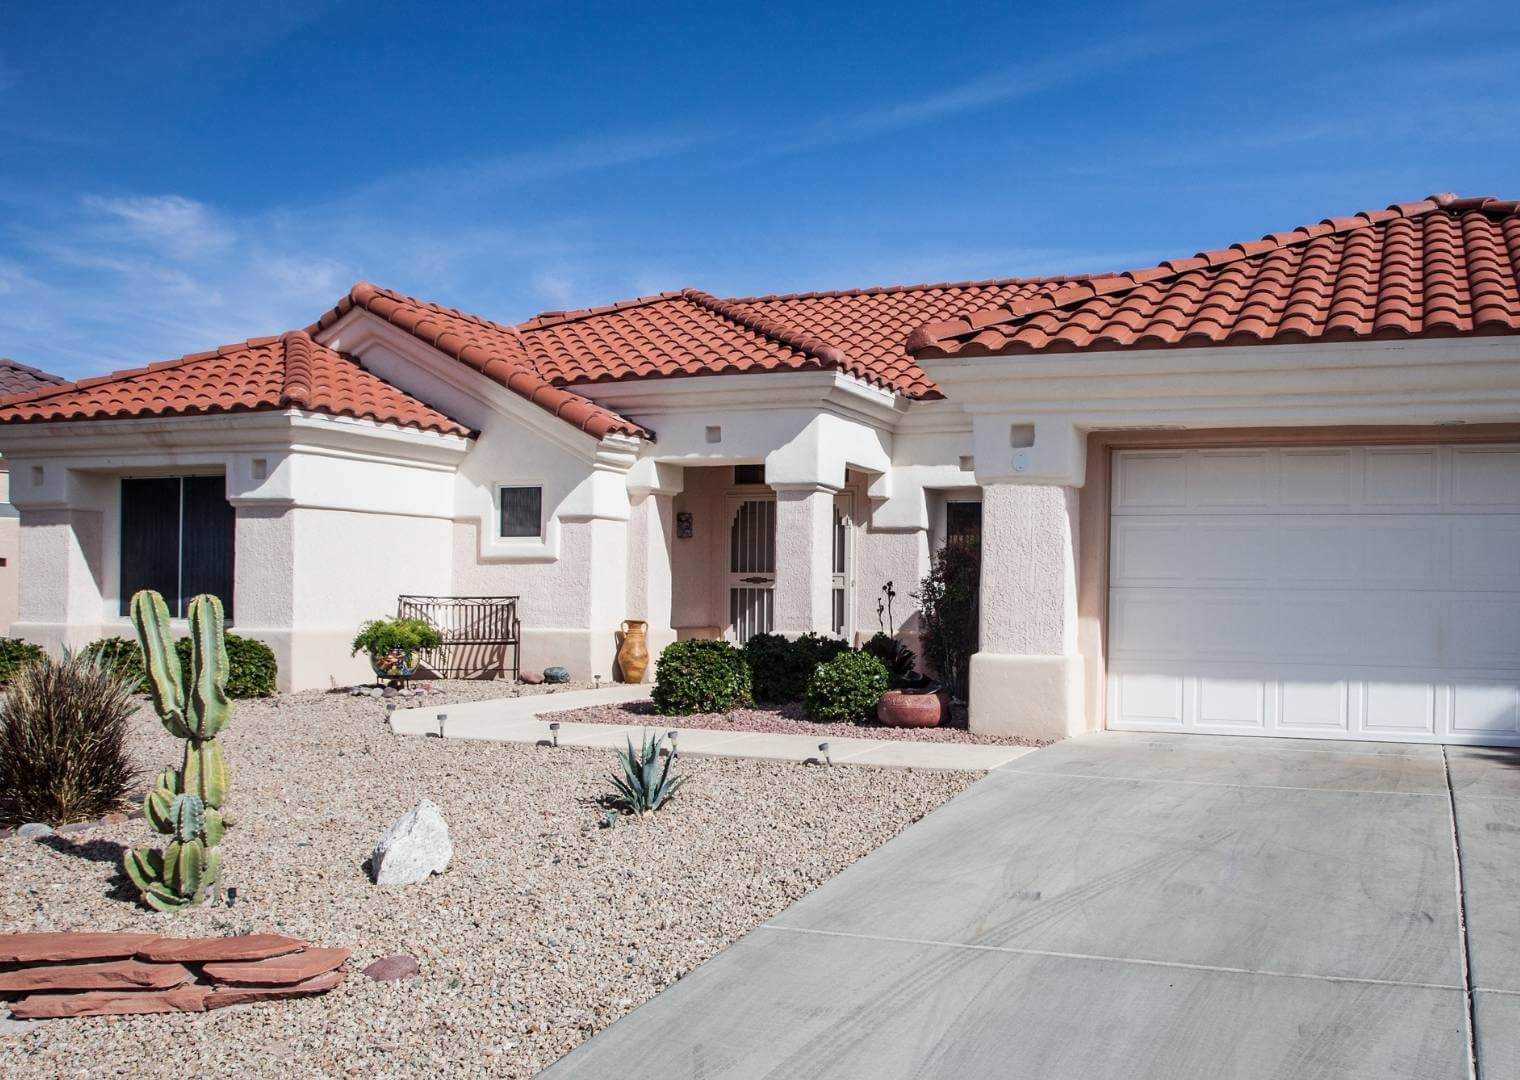 You will see Spanish Colonial roots in most all new homes built in the Phoenix area. They typically include Spanish Colonial exteriors and modern interiors with Ranch style layouts.